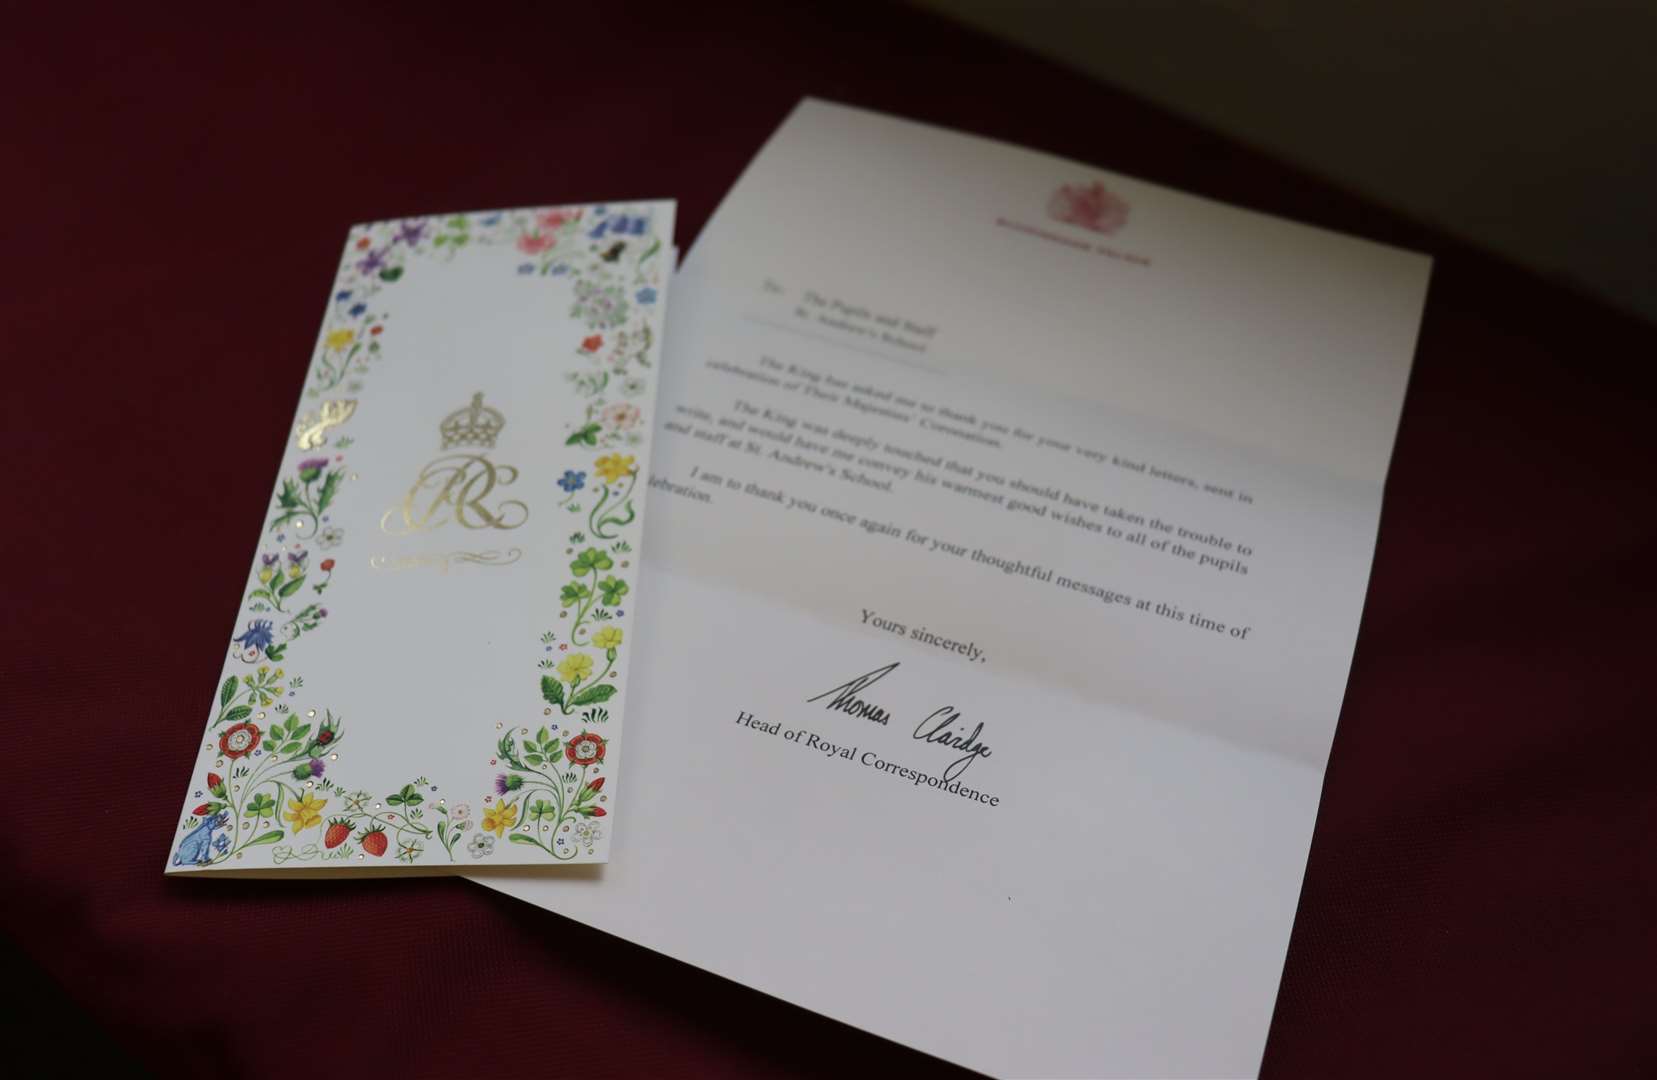 Pupils received a letter and thank you card from the royal household